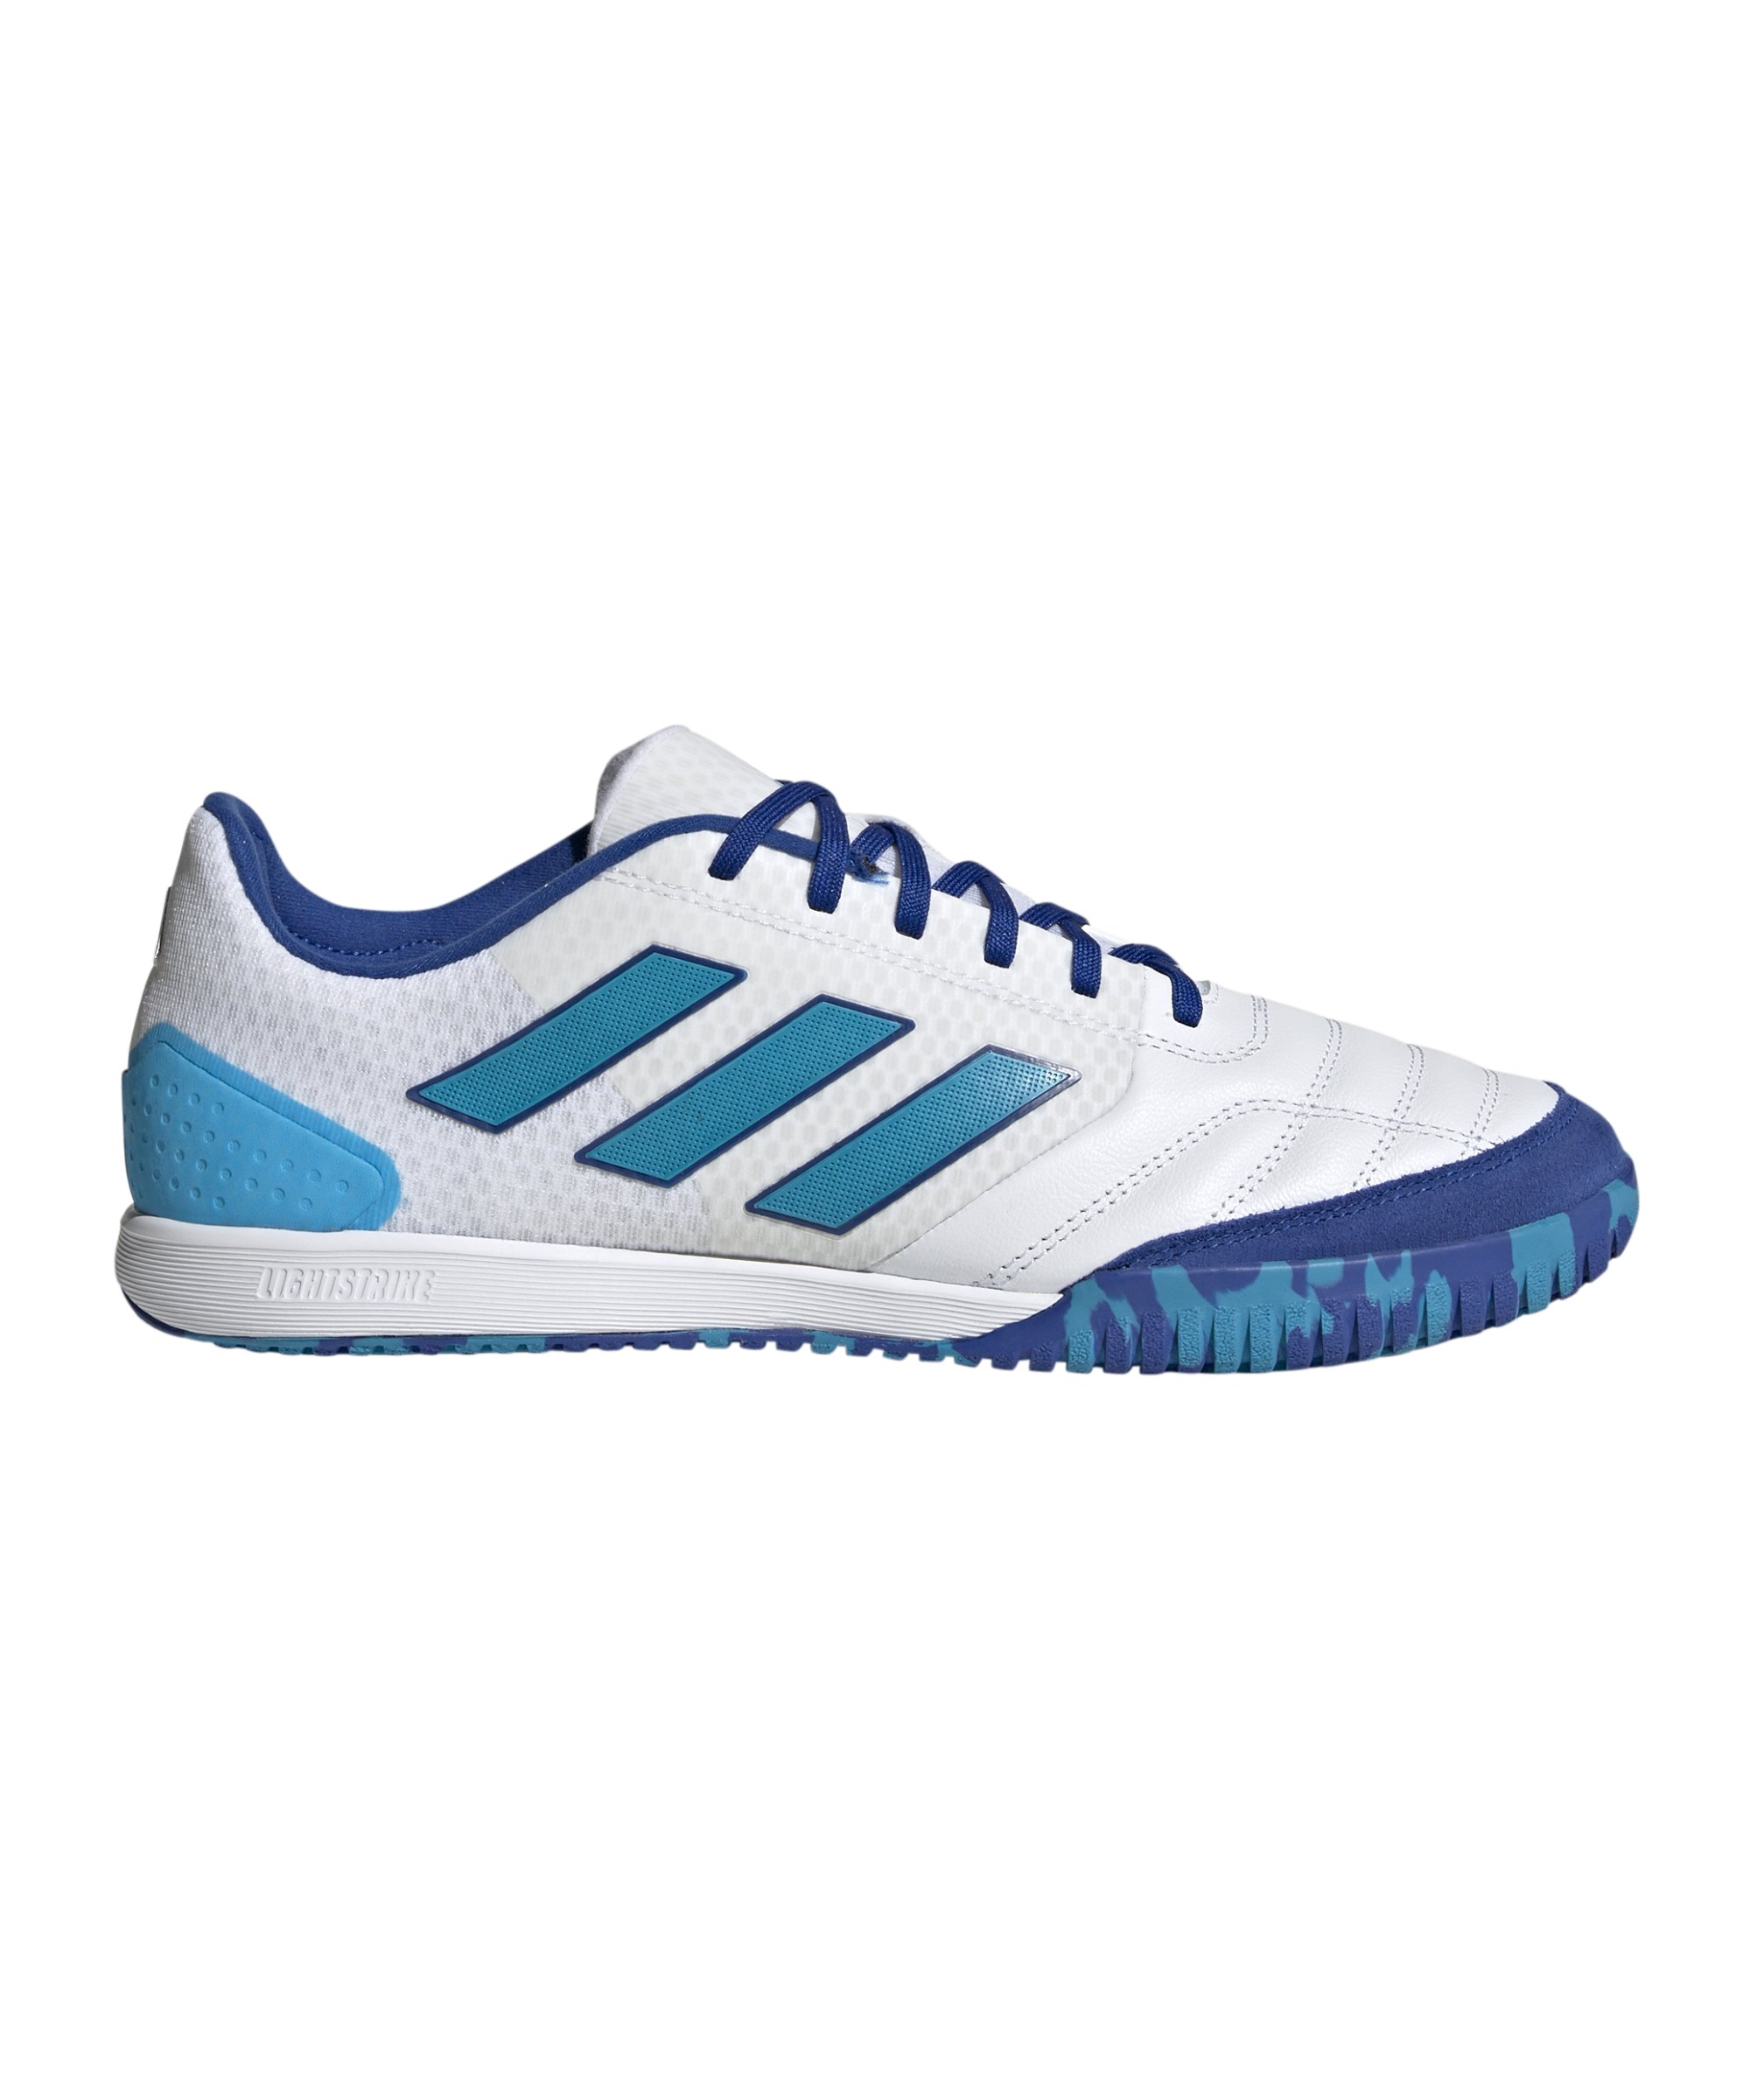 adidas Top Sala Competition Halle Weiss Blau - weiss